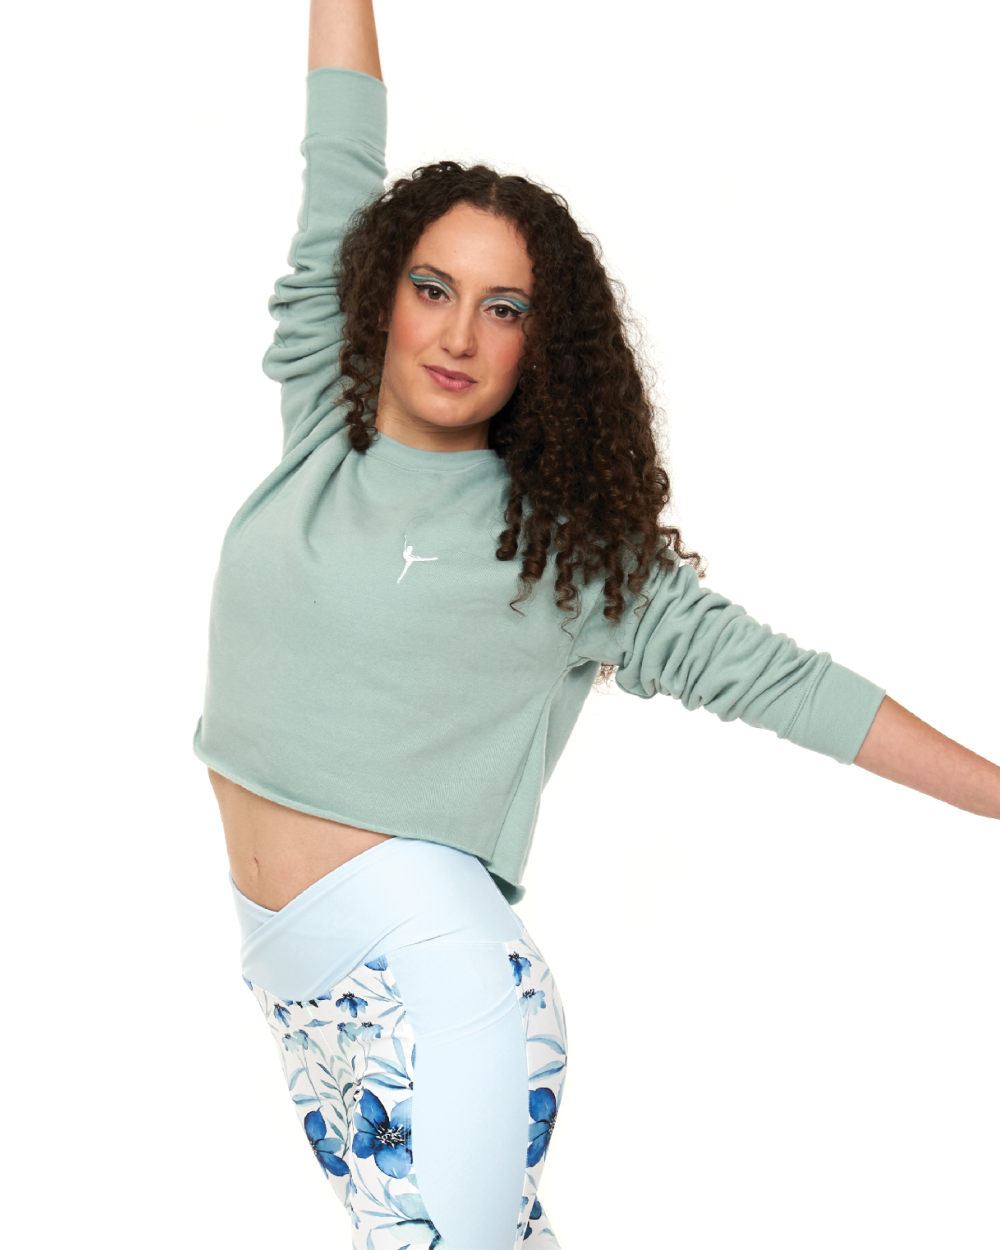 female wearing a blue crop jumper with white embroidered ballerina and floral print leggings